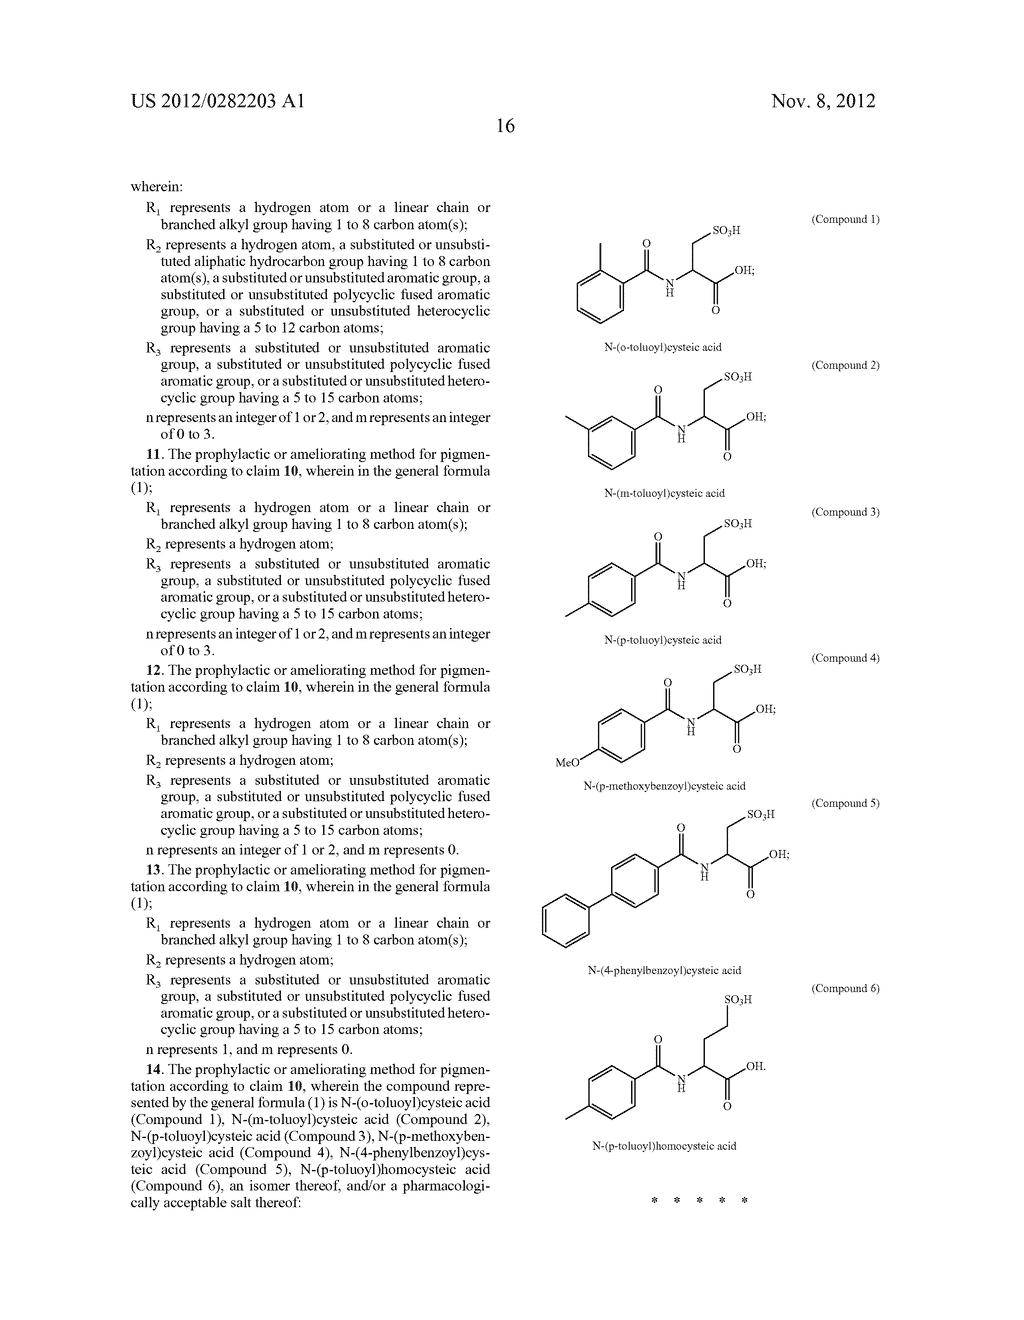 PROPHYLACTIC OR AMELIORATING AGENT FOR PIGMENTATION - diagram, schematic, and image 17